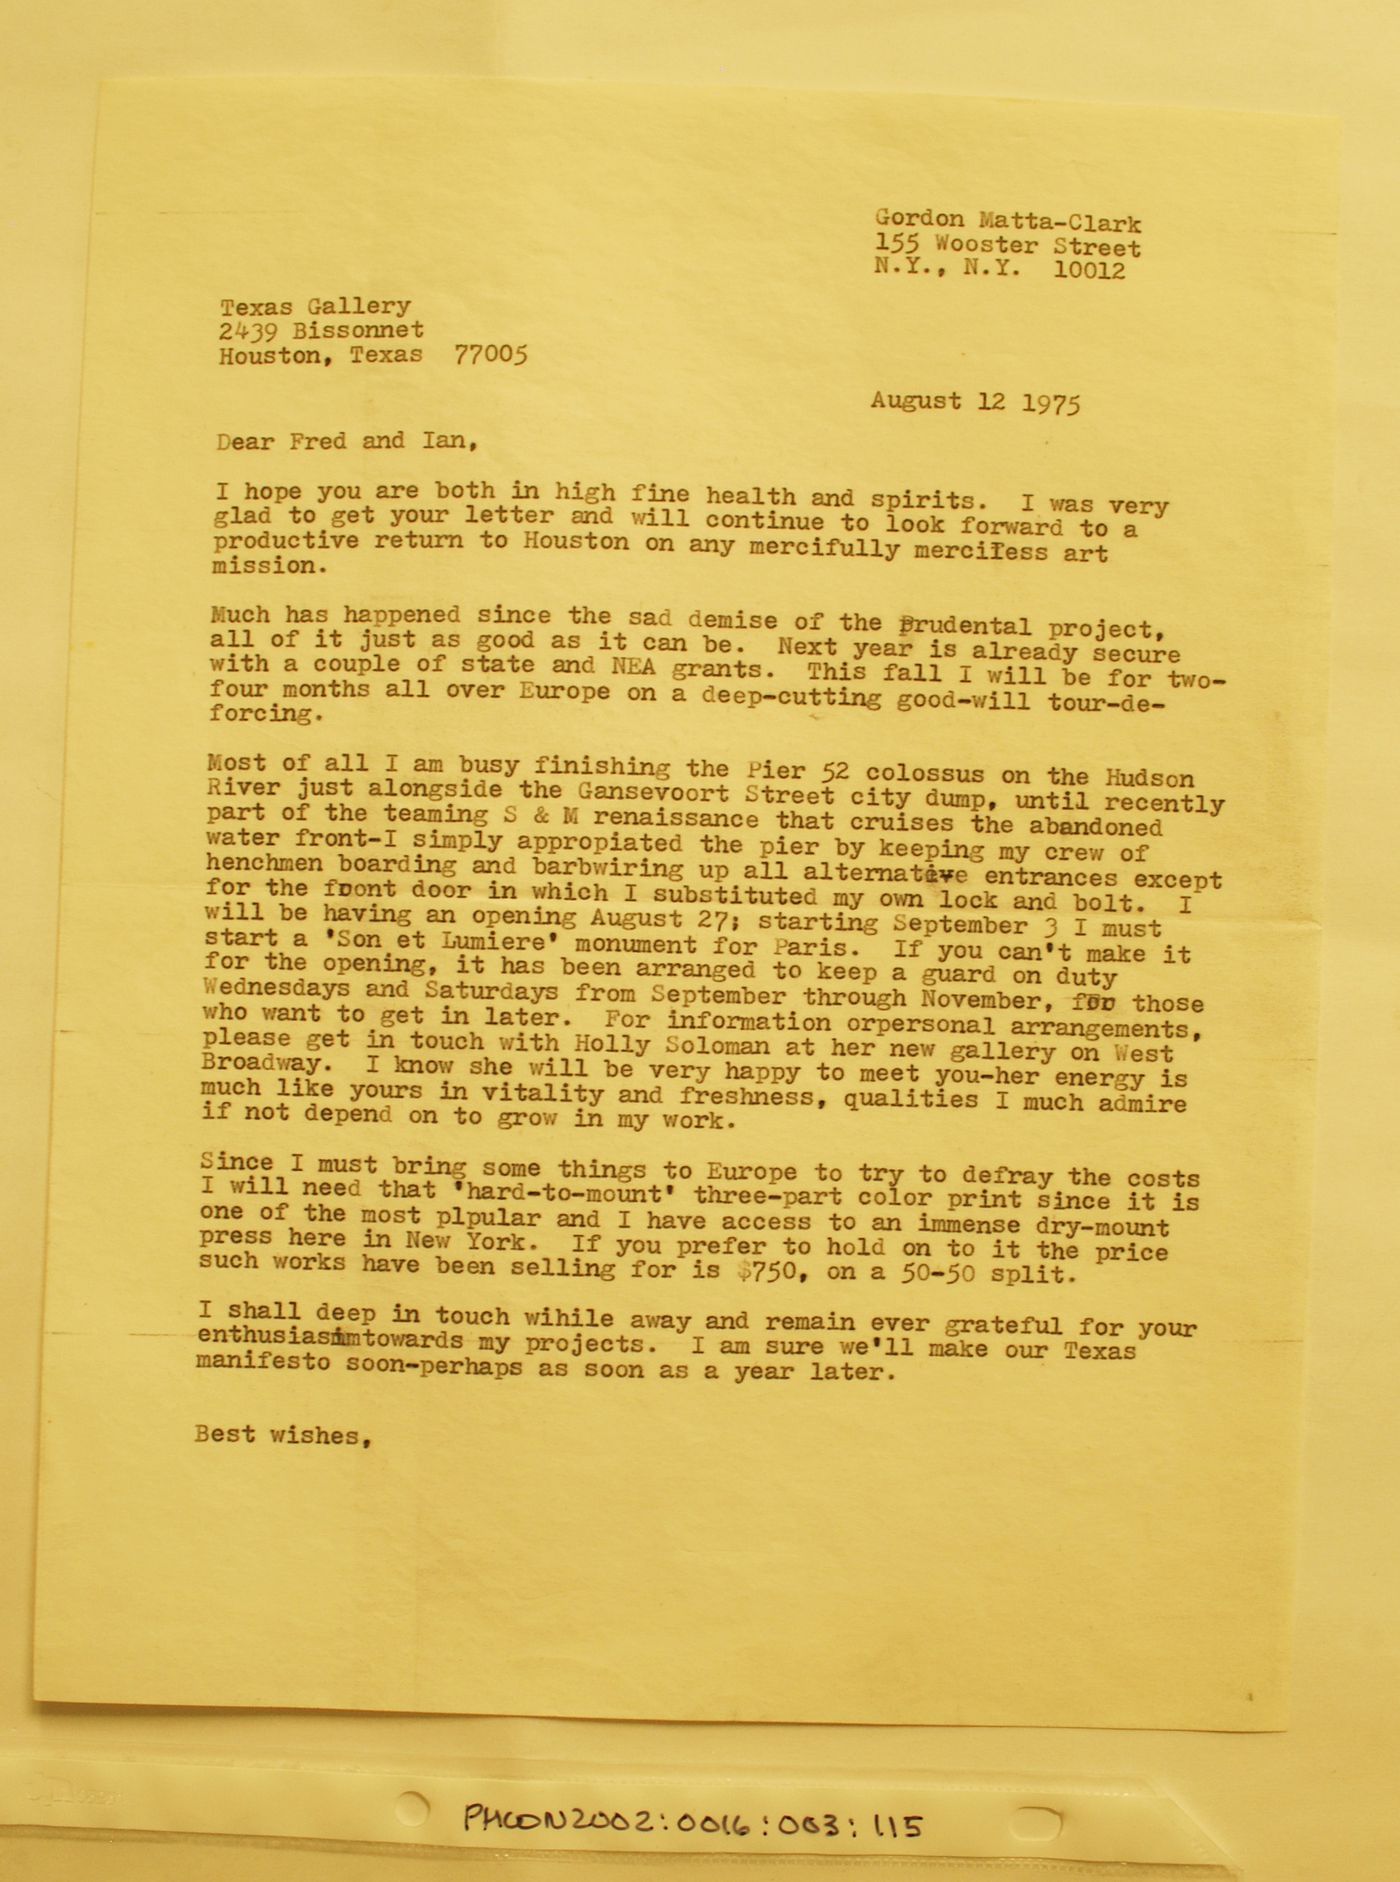 Letter from Gordon Matta-Clark to Fred [probably Fredericka Hunter] and Ian Glennie